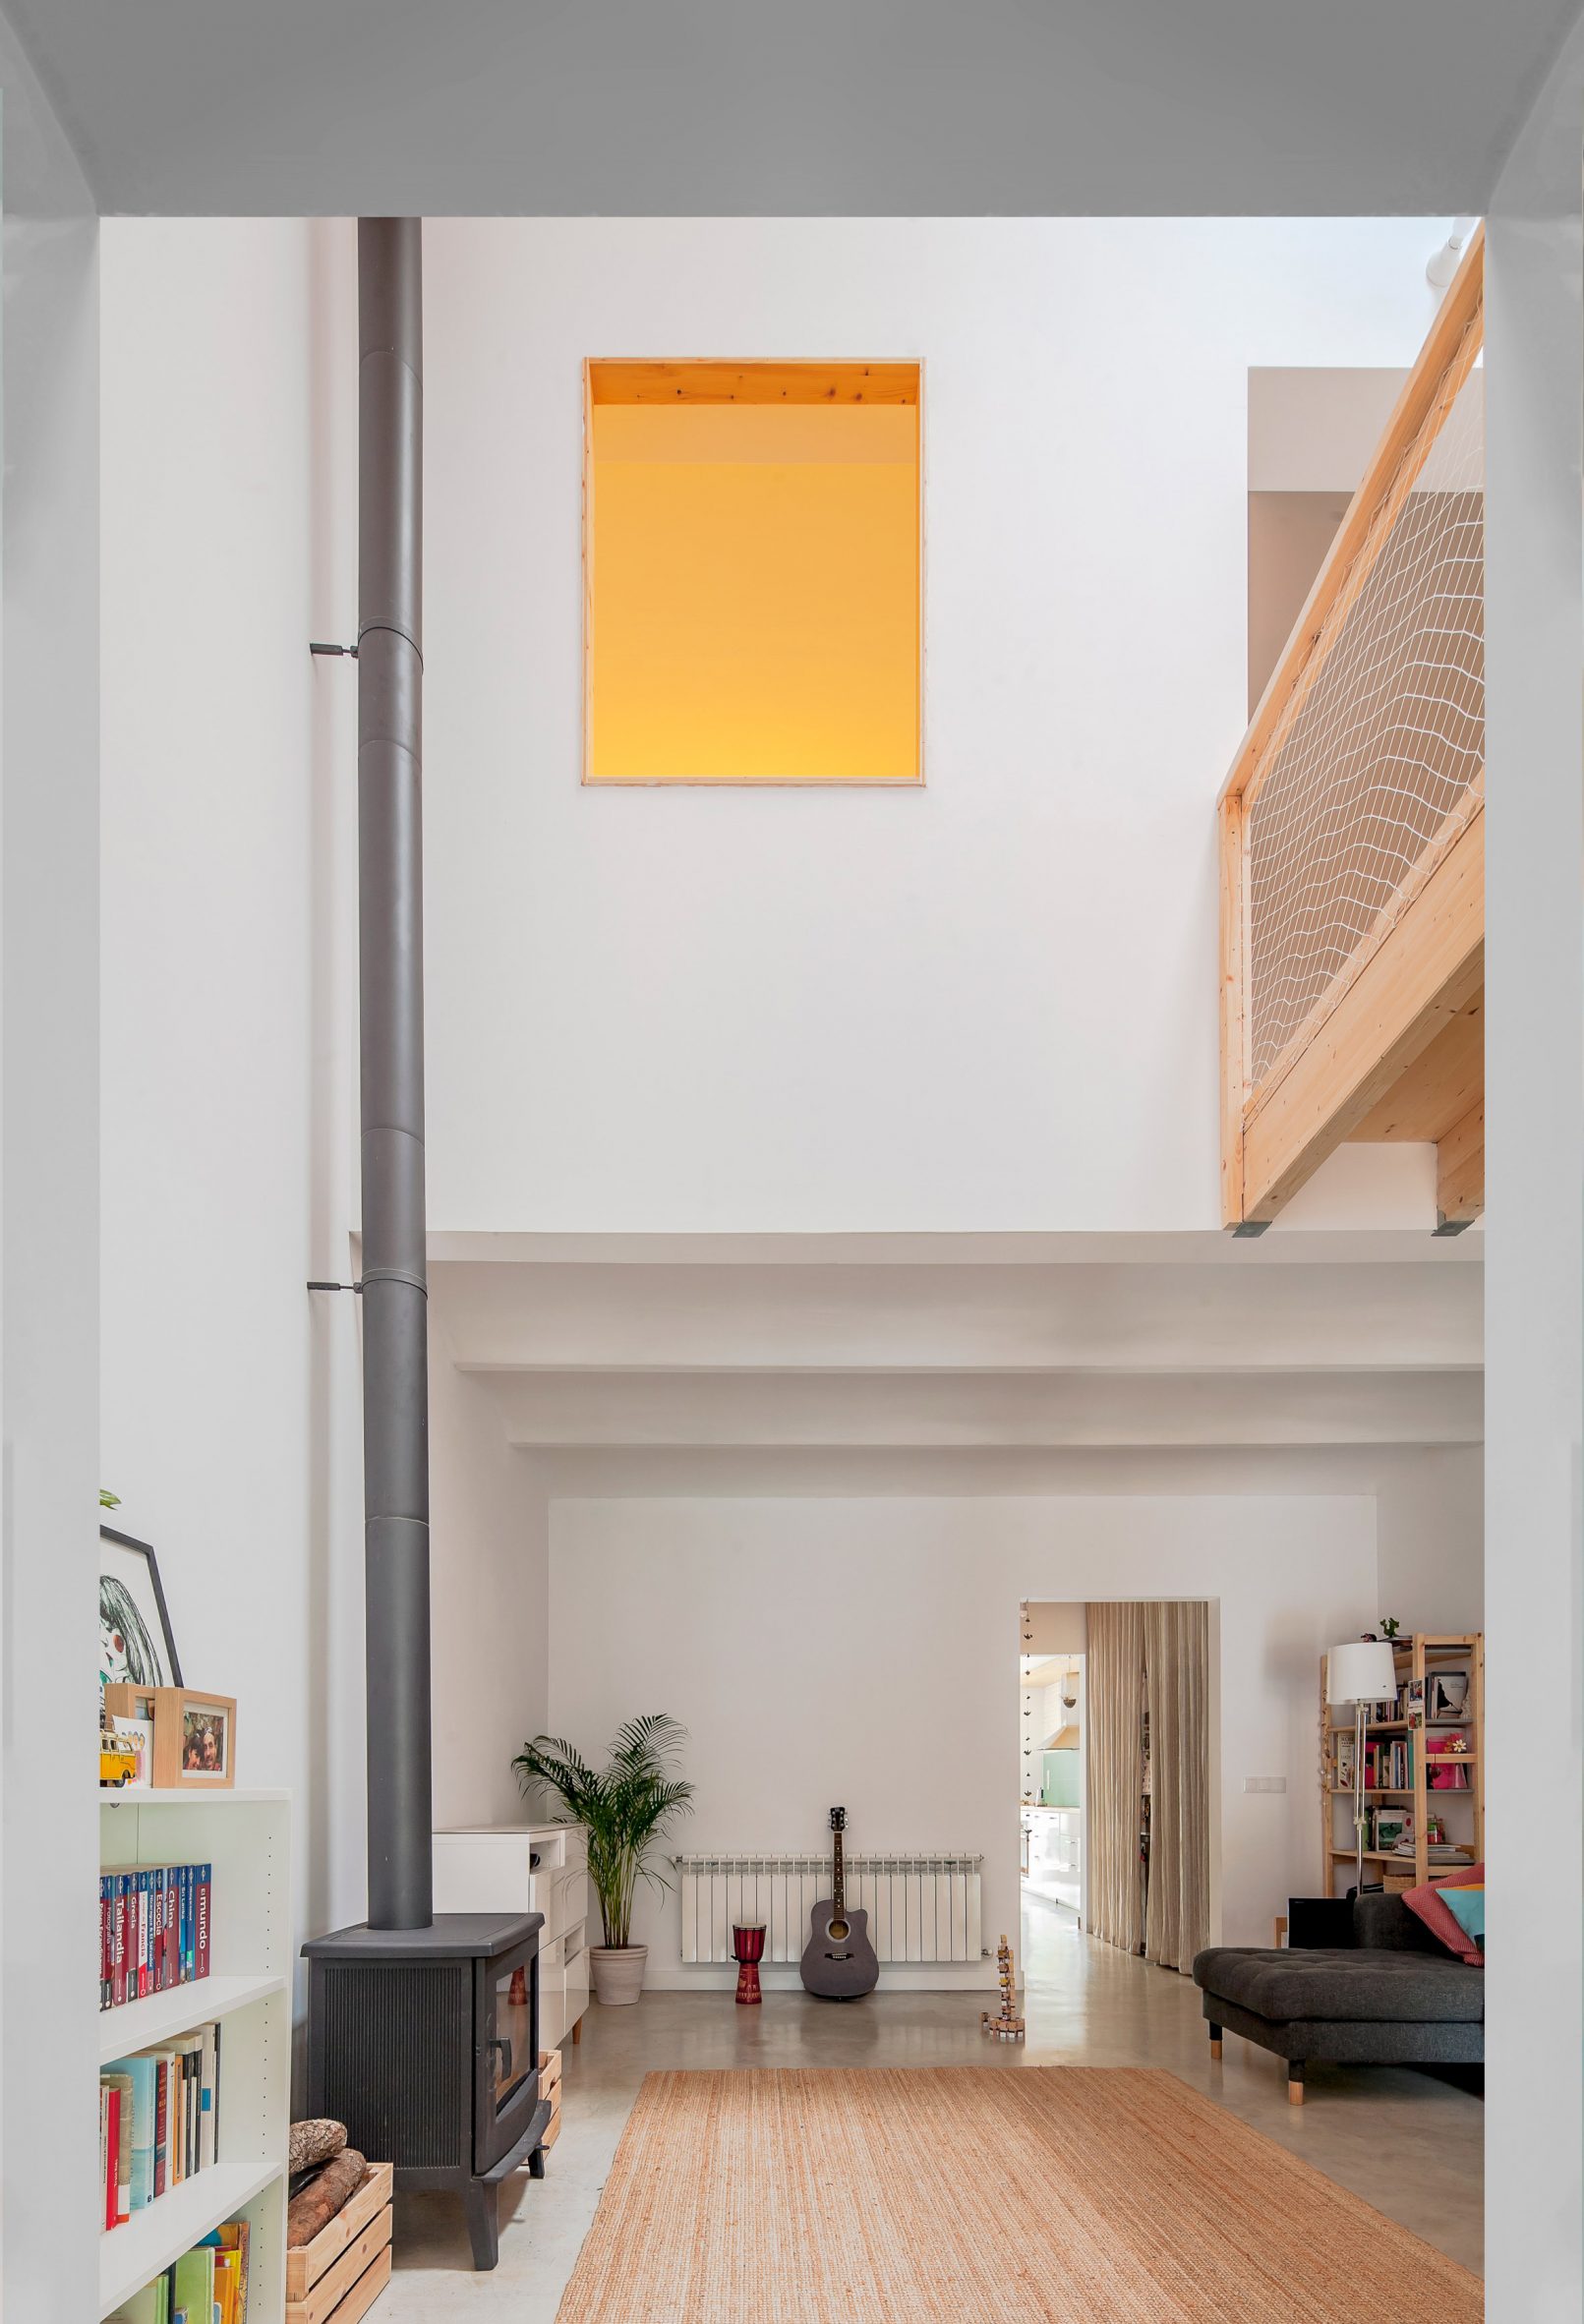 The home by SAU Taller d'Arquitectura has a double height living area